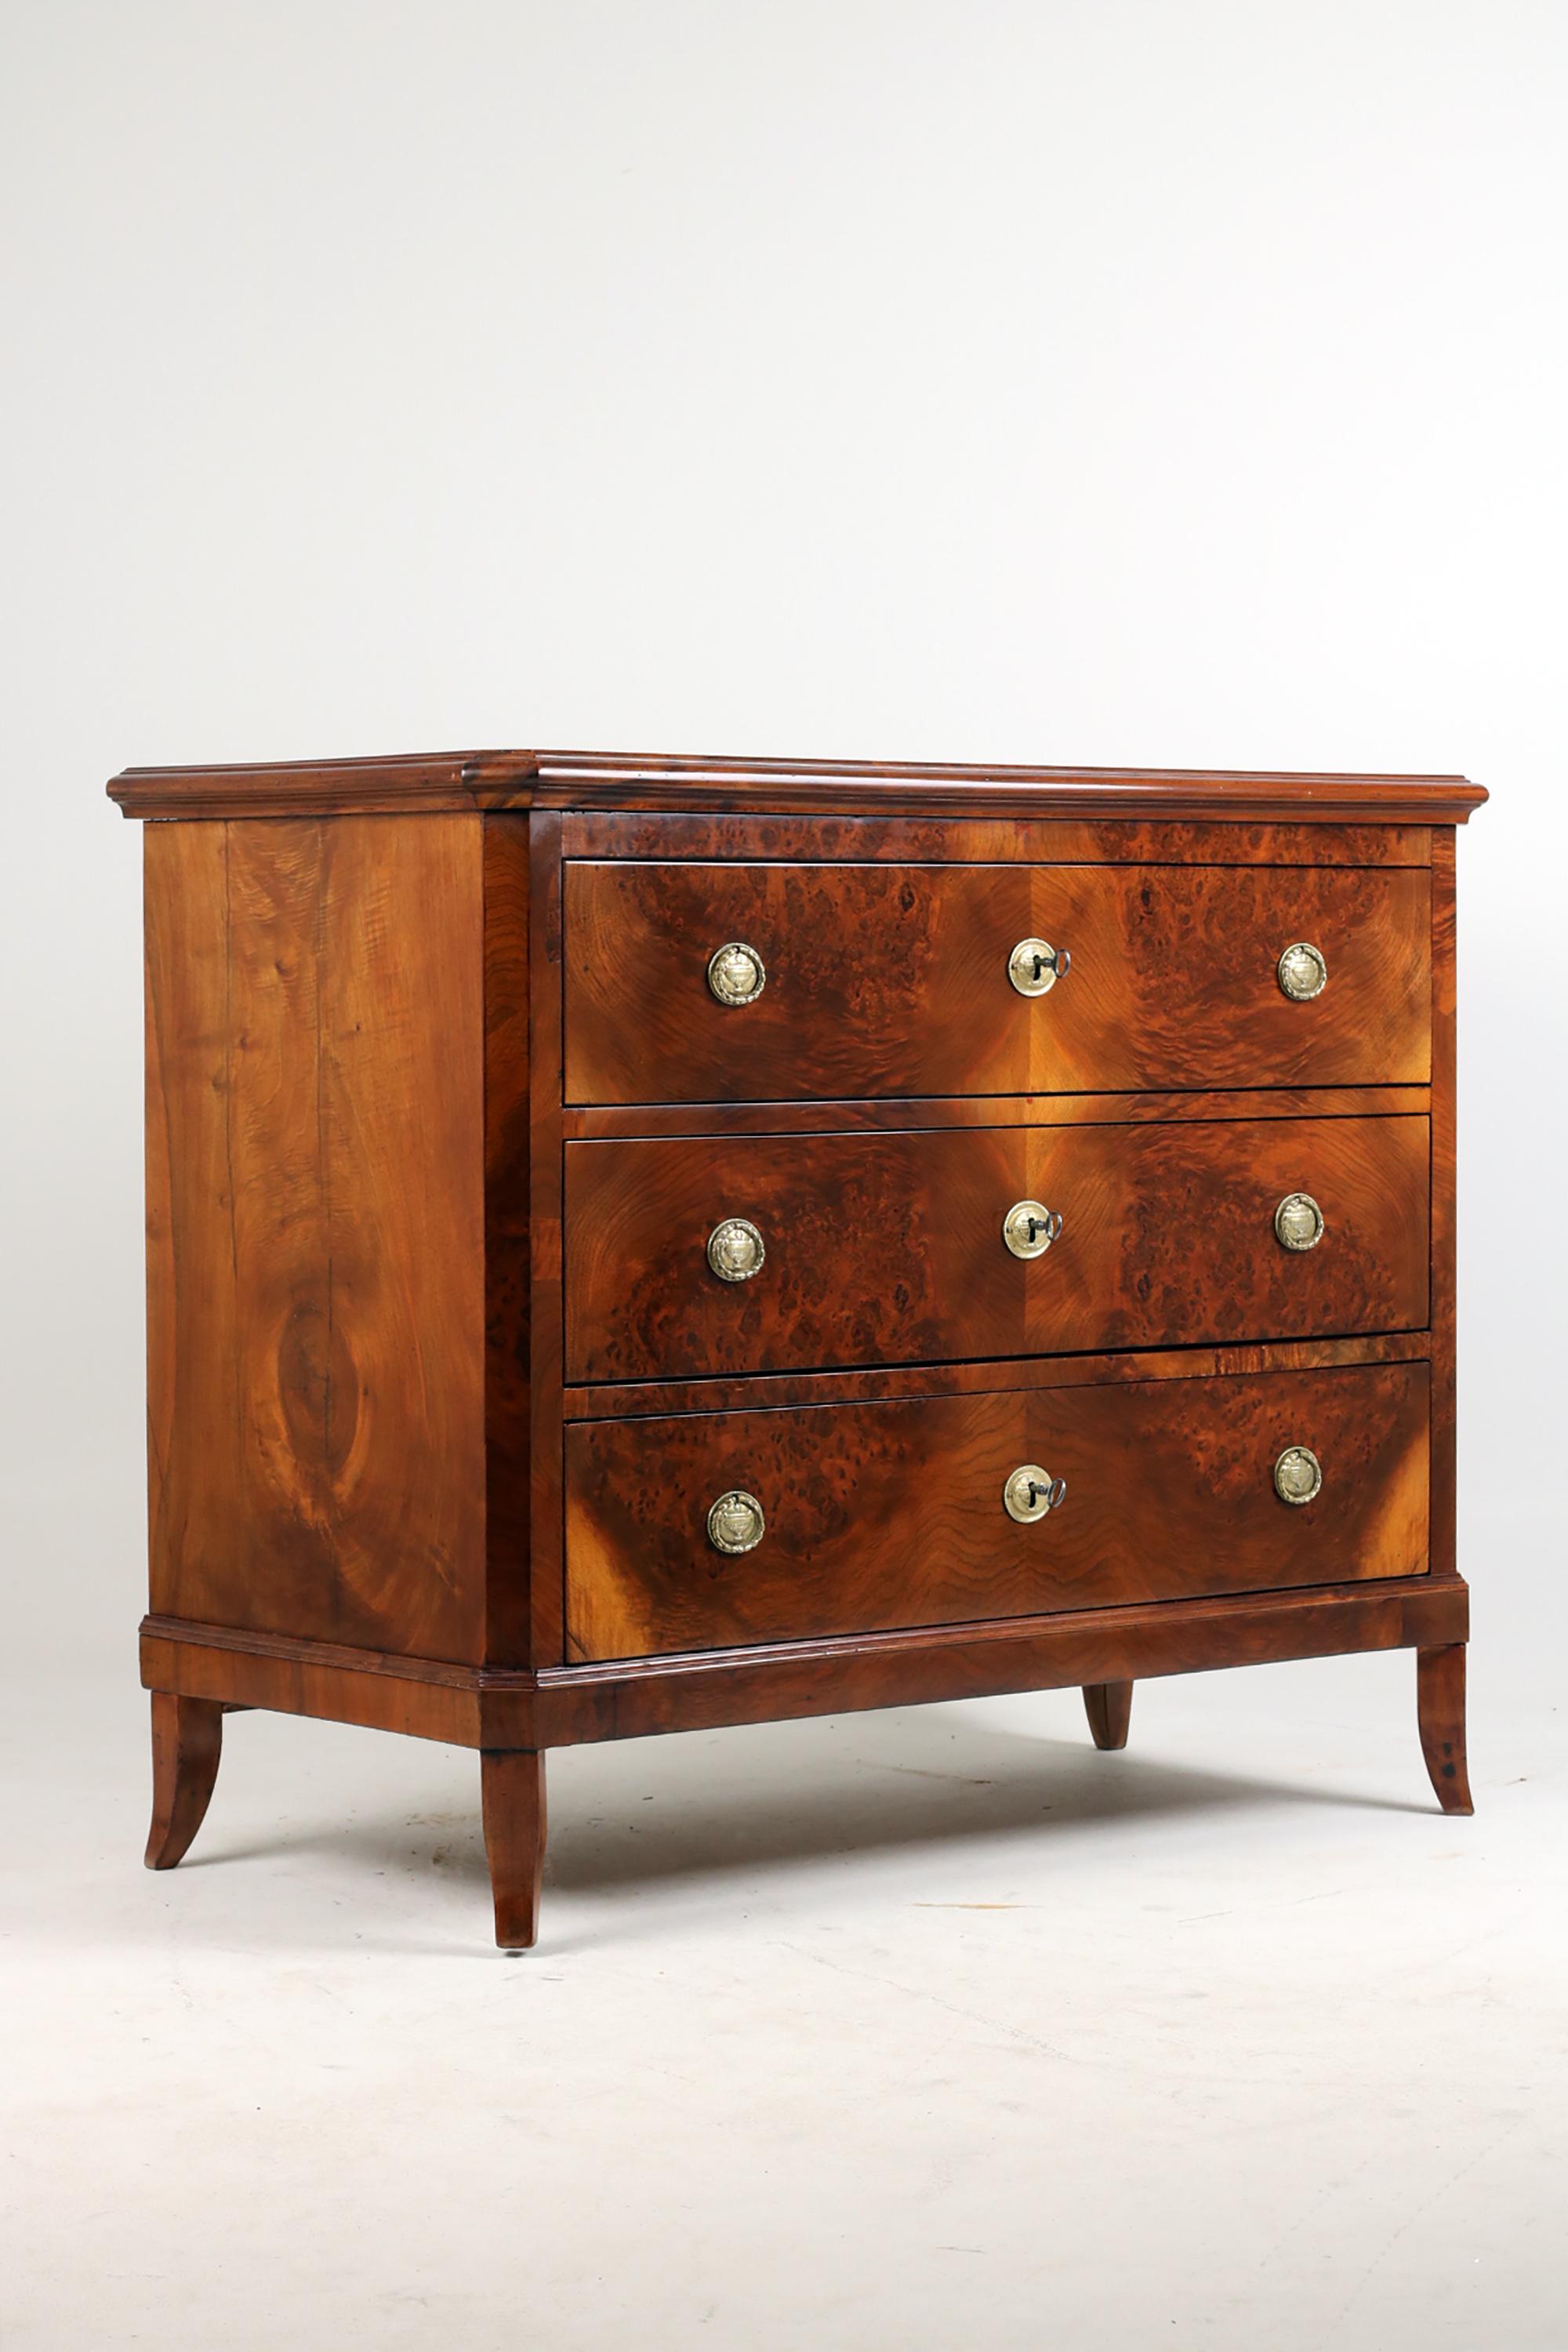 Chest of drawers, 19th century, Biedermeier

Biedermeier chest of drawers in walnut veneer, 3 drawers, very nice grain, 3 locks, 3 keys, original brass fittings, body rests on slightly flared feet

The condition of this commode is very